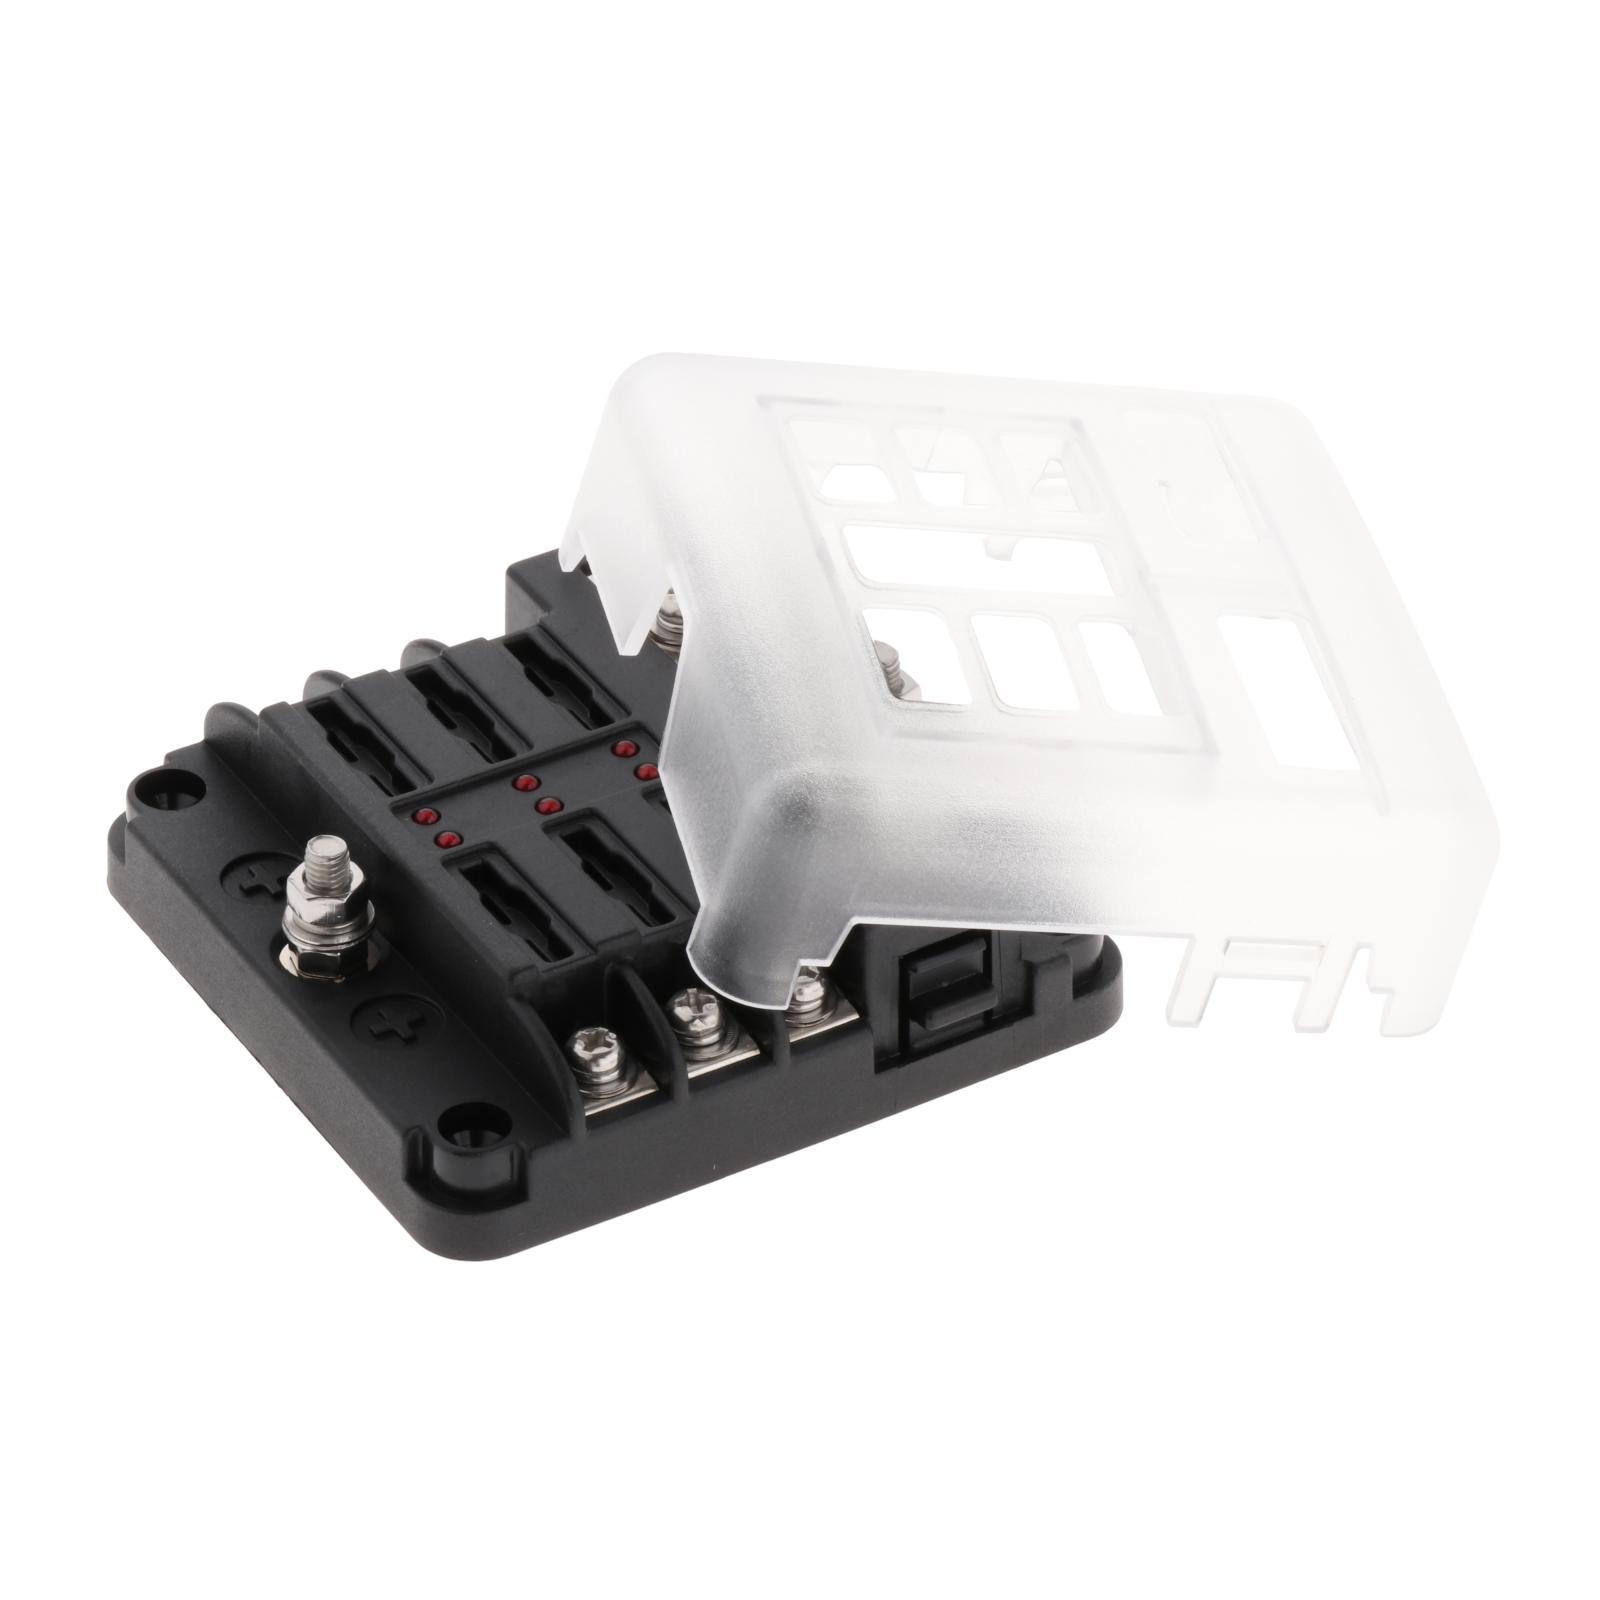 PC Cars LED Fuse Box PBT Damp-Proof 6 Circuit for Boats Tankers Yacht SUV